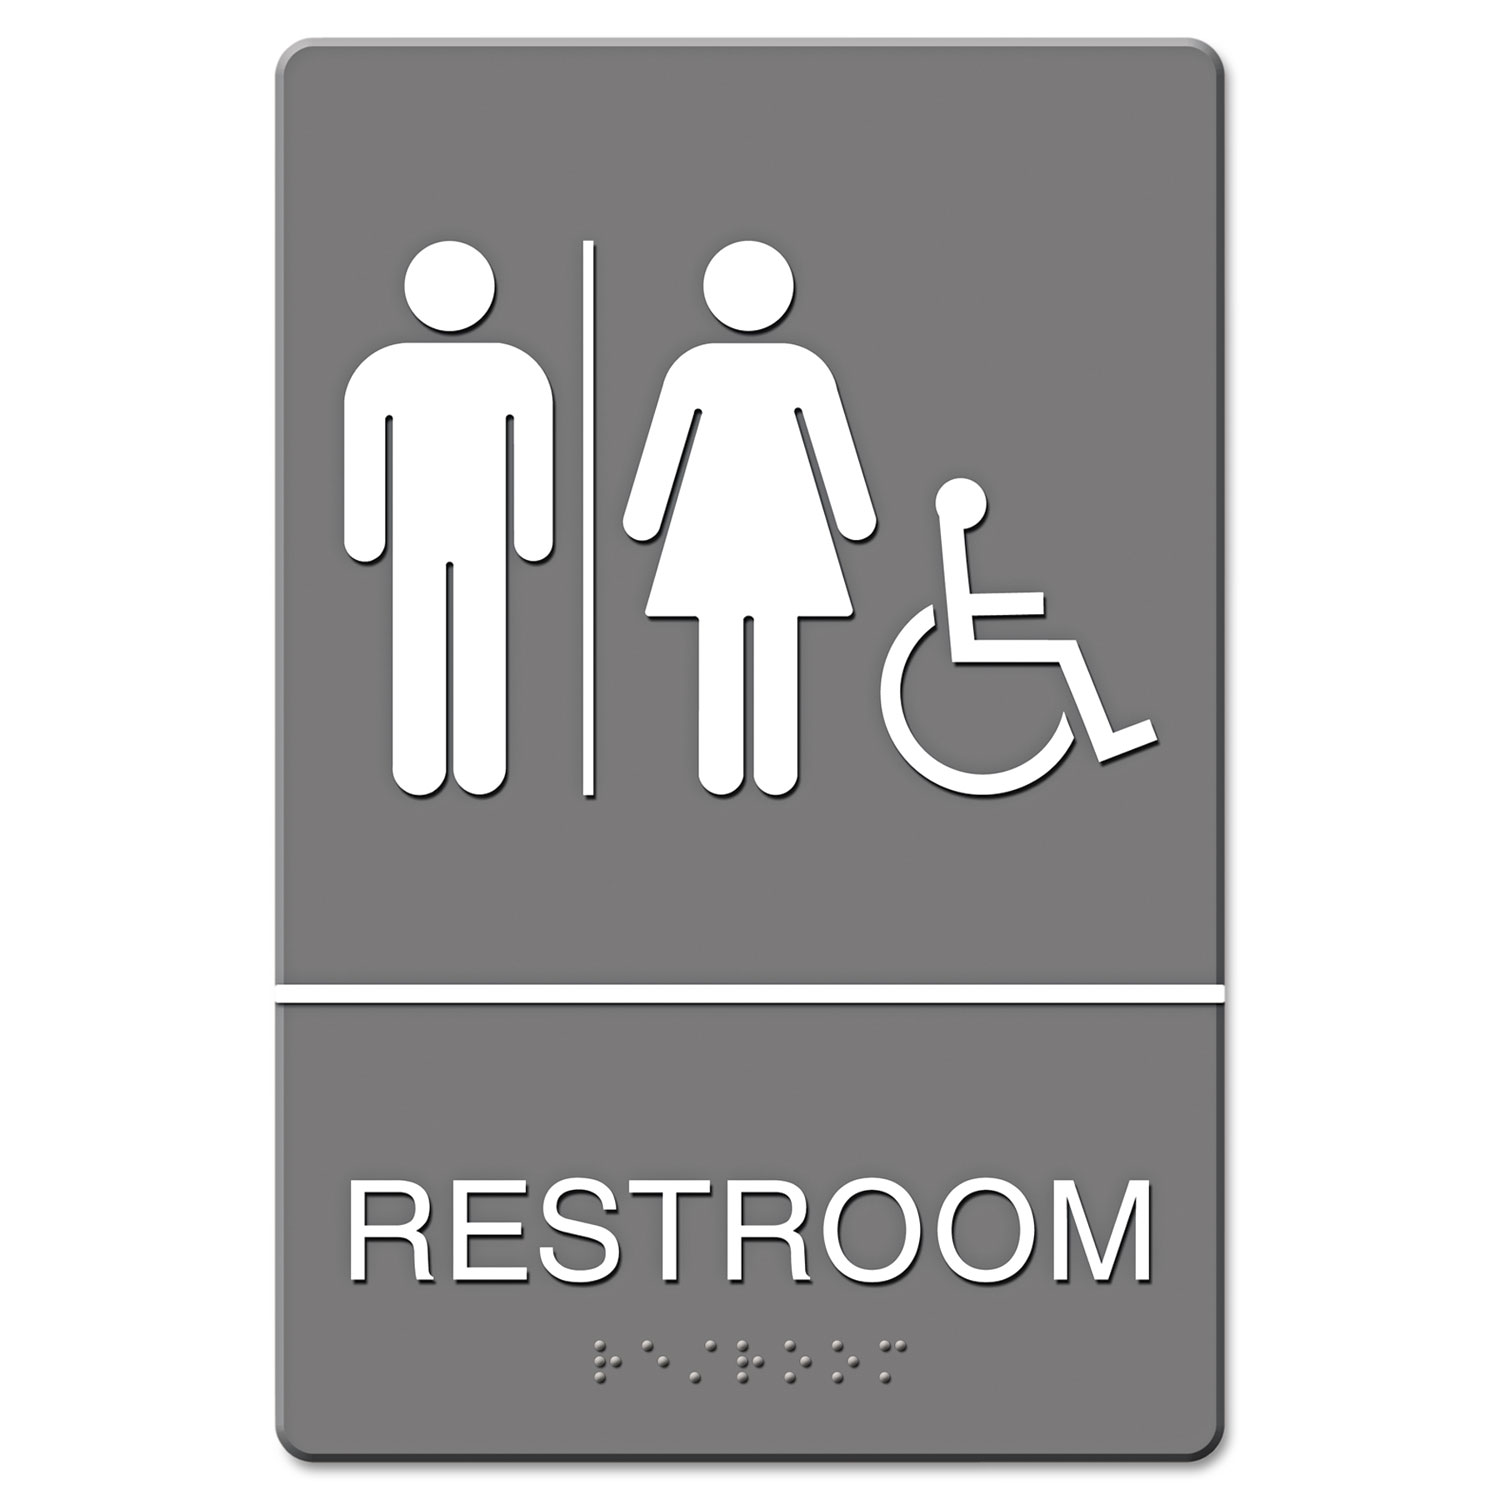 ADA Sign, Restroom/Wheelchair Accessible Tactile Symbol, Molded Plastic, 6 x 9